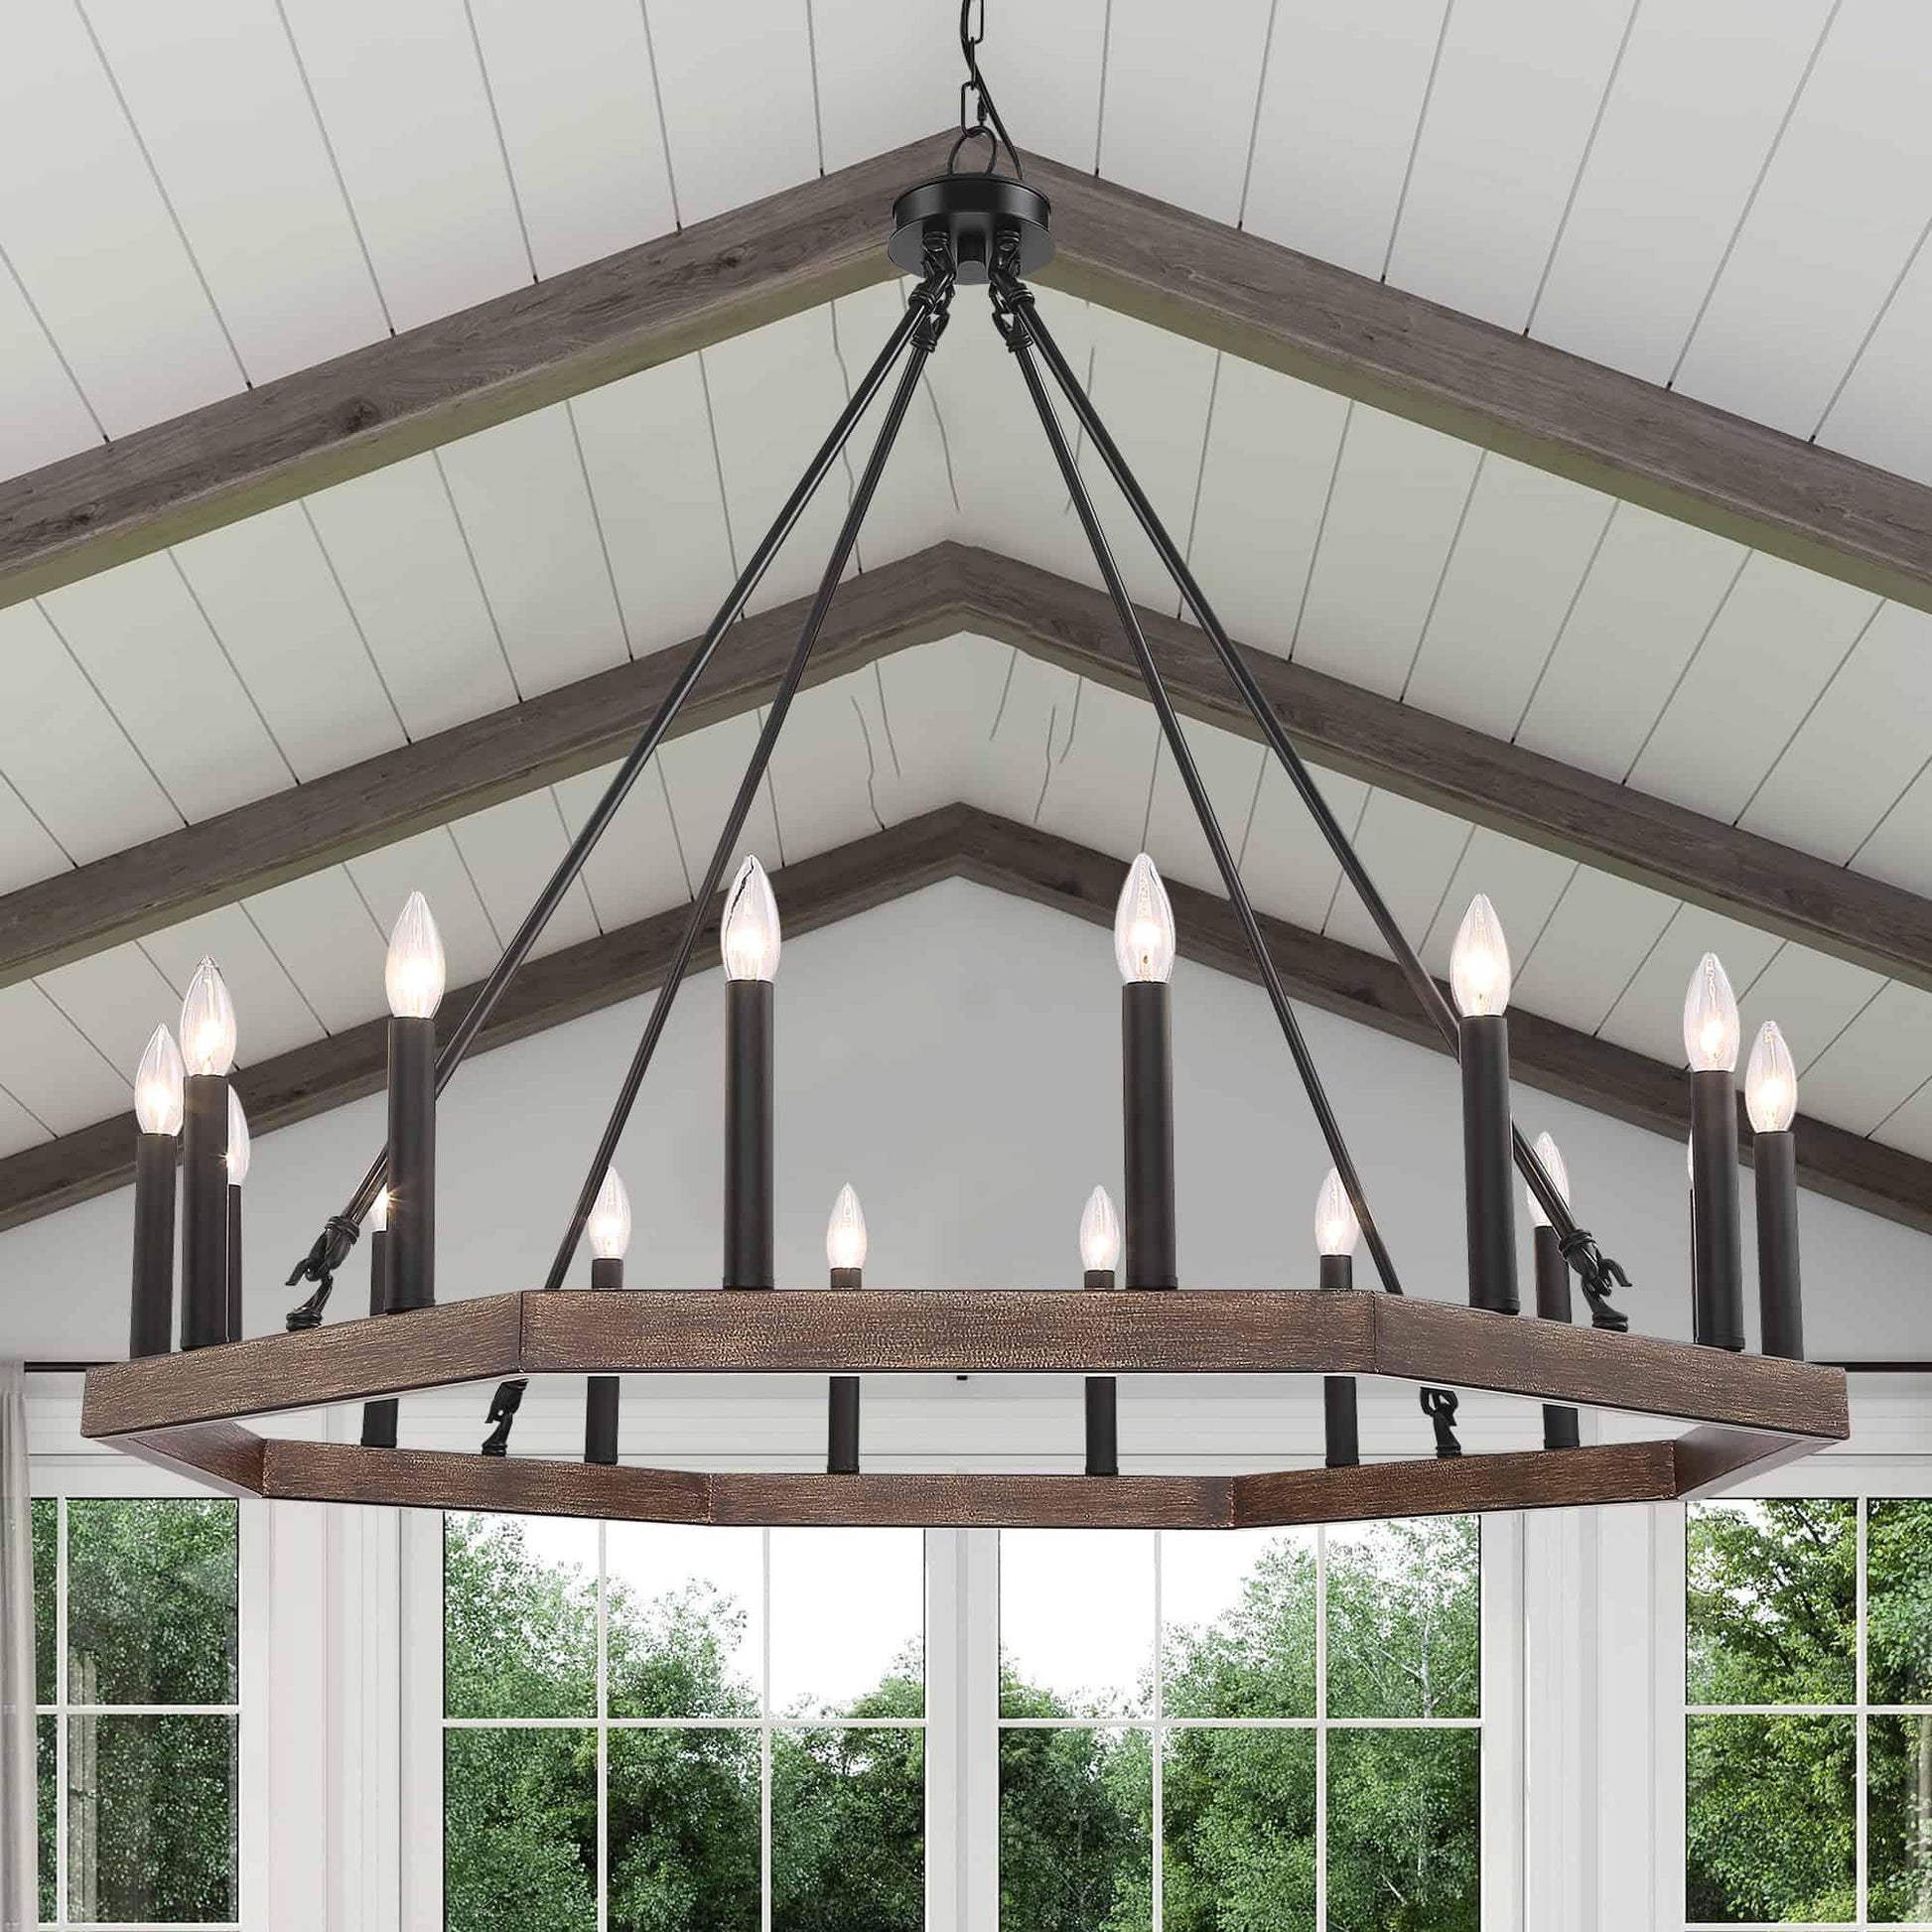 16 light candle style wagon wheel chandelier 1 (14) by ACROMA